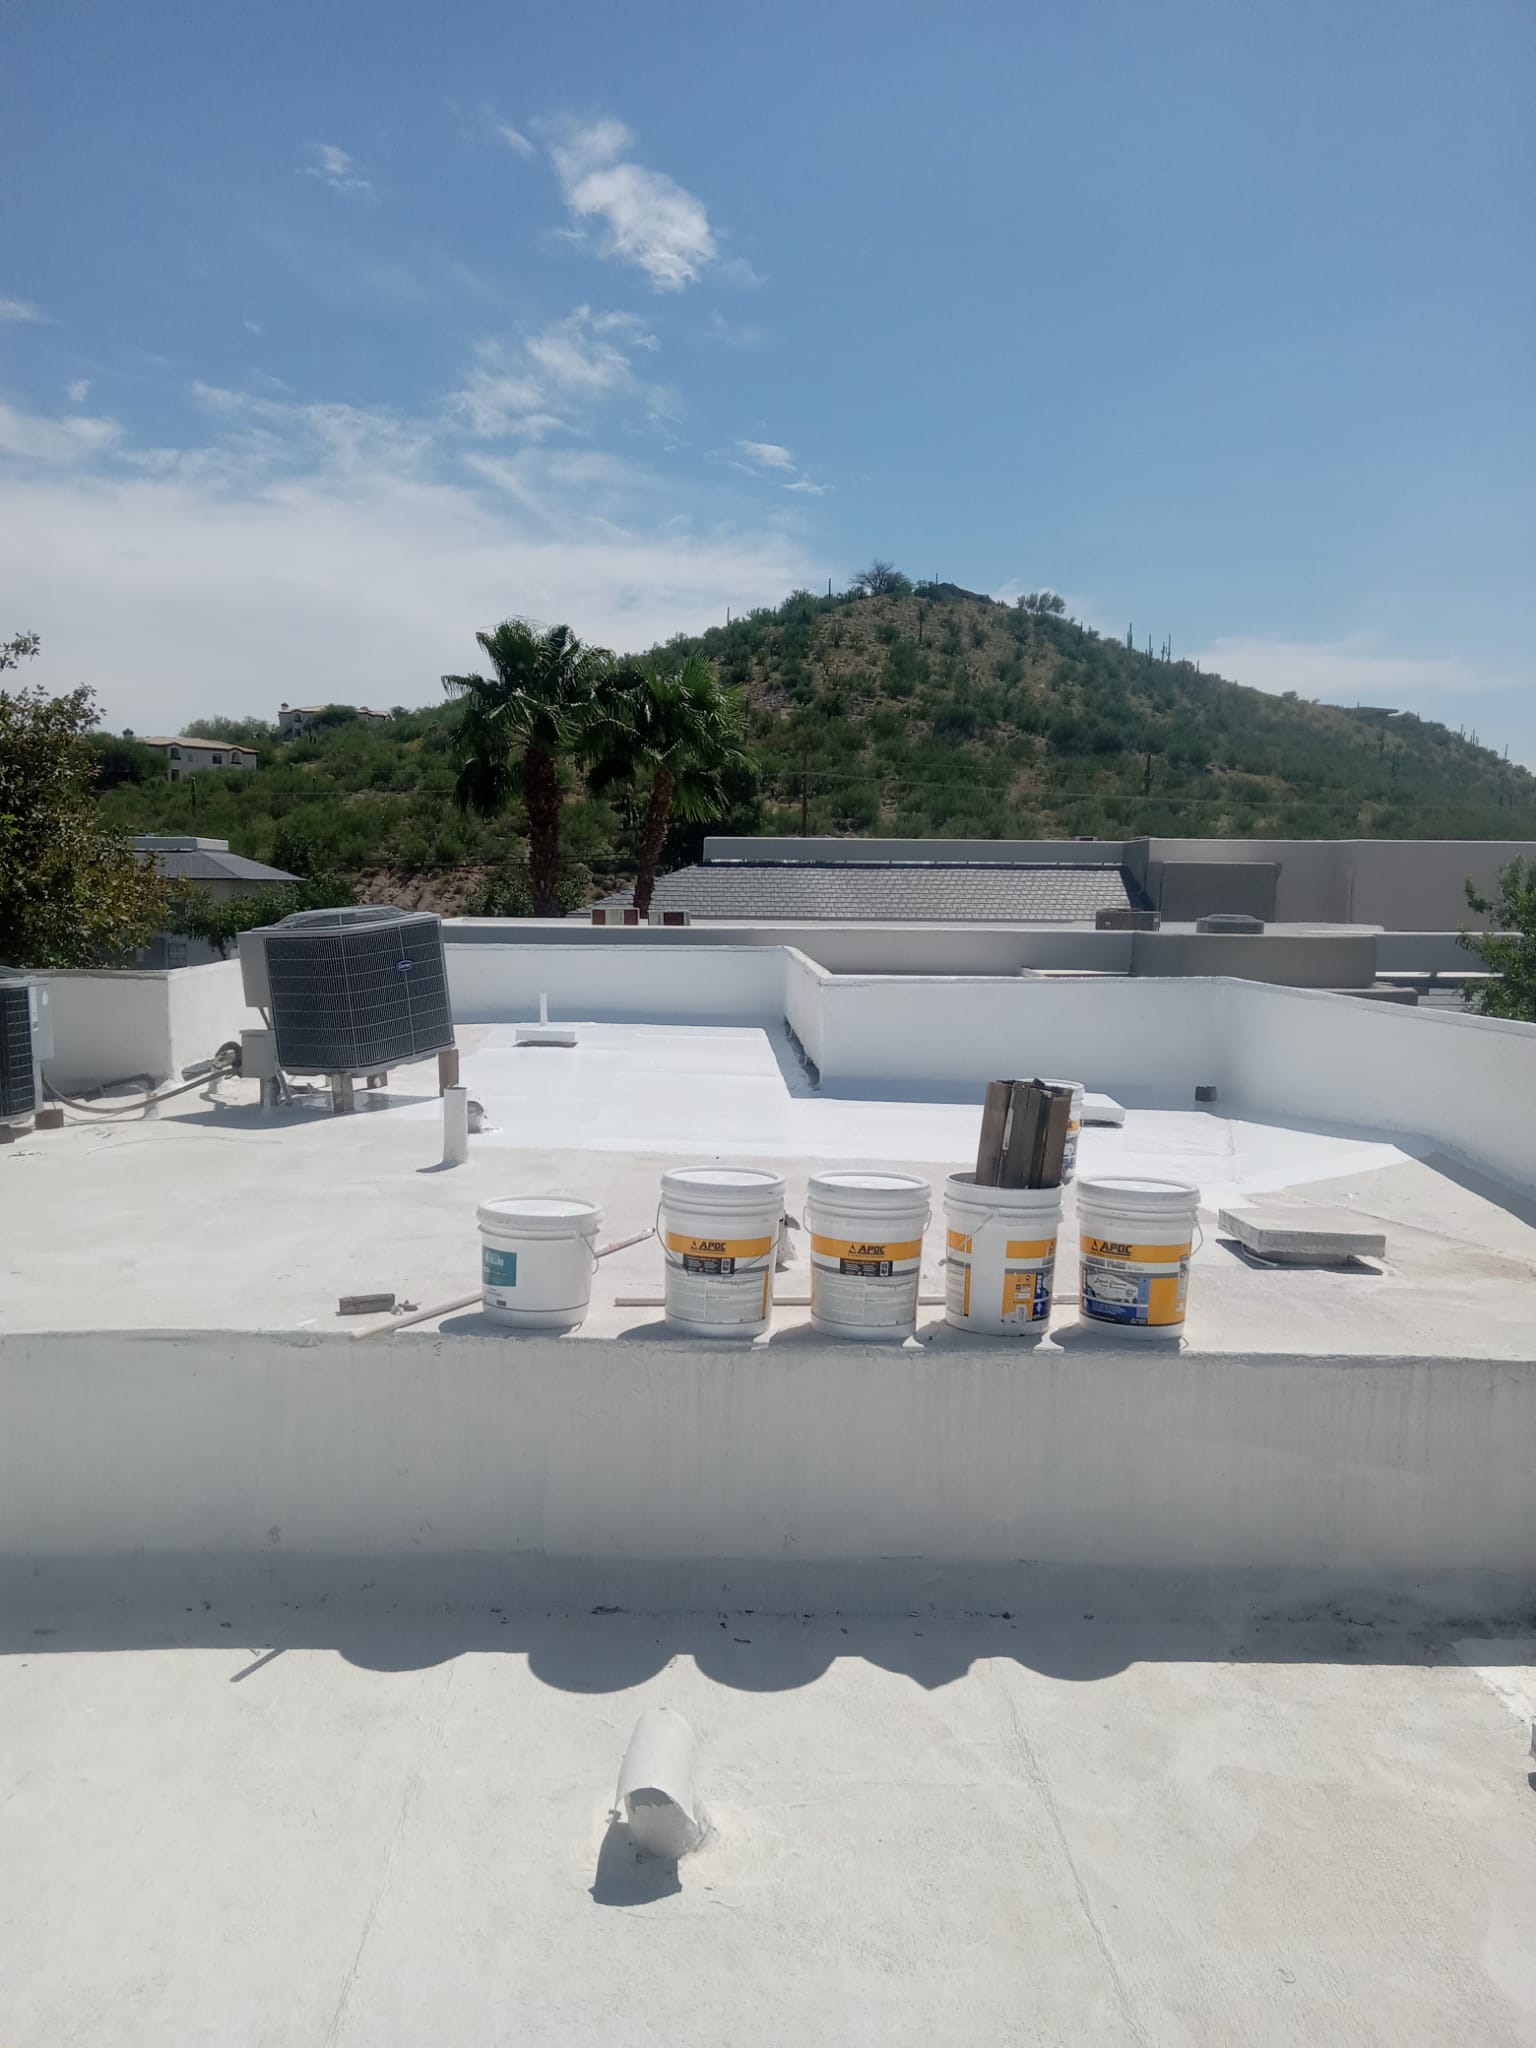 Glimpse of an Estancia roof mid-coating application.